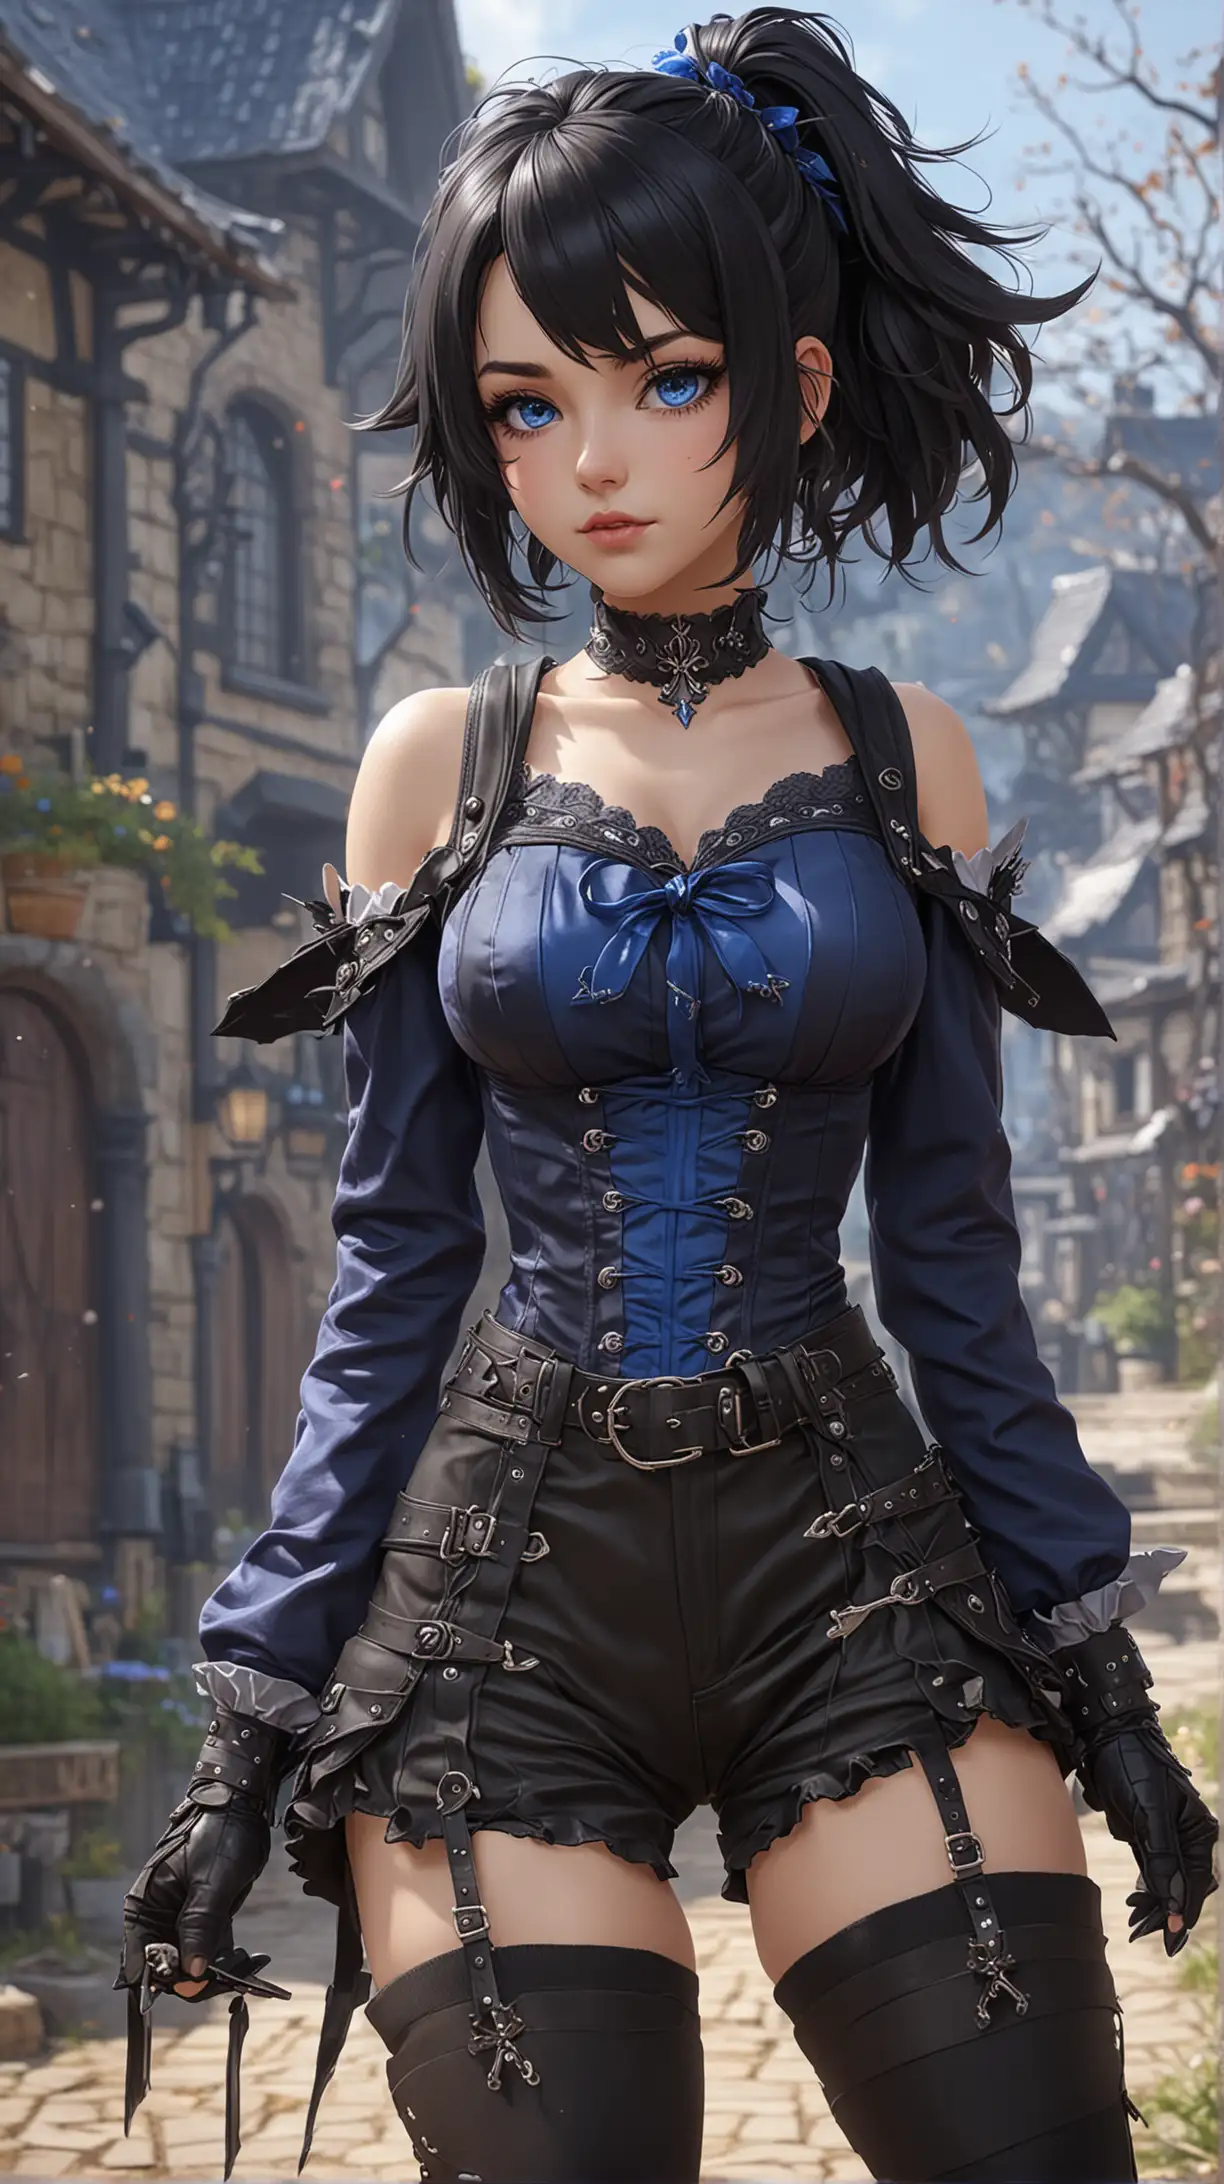 Gothic Style Female Original Character with Black Hair and Blue Eyes in Genshin Impact Art Style